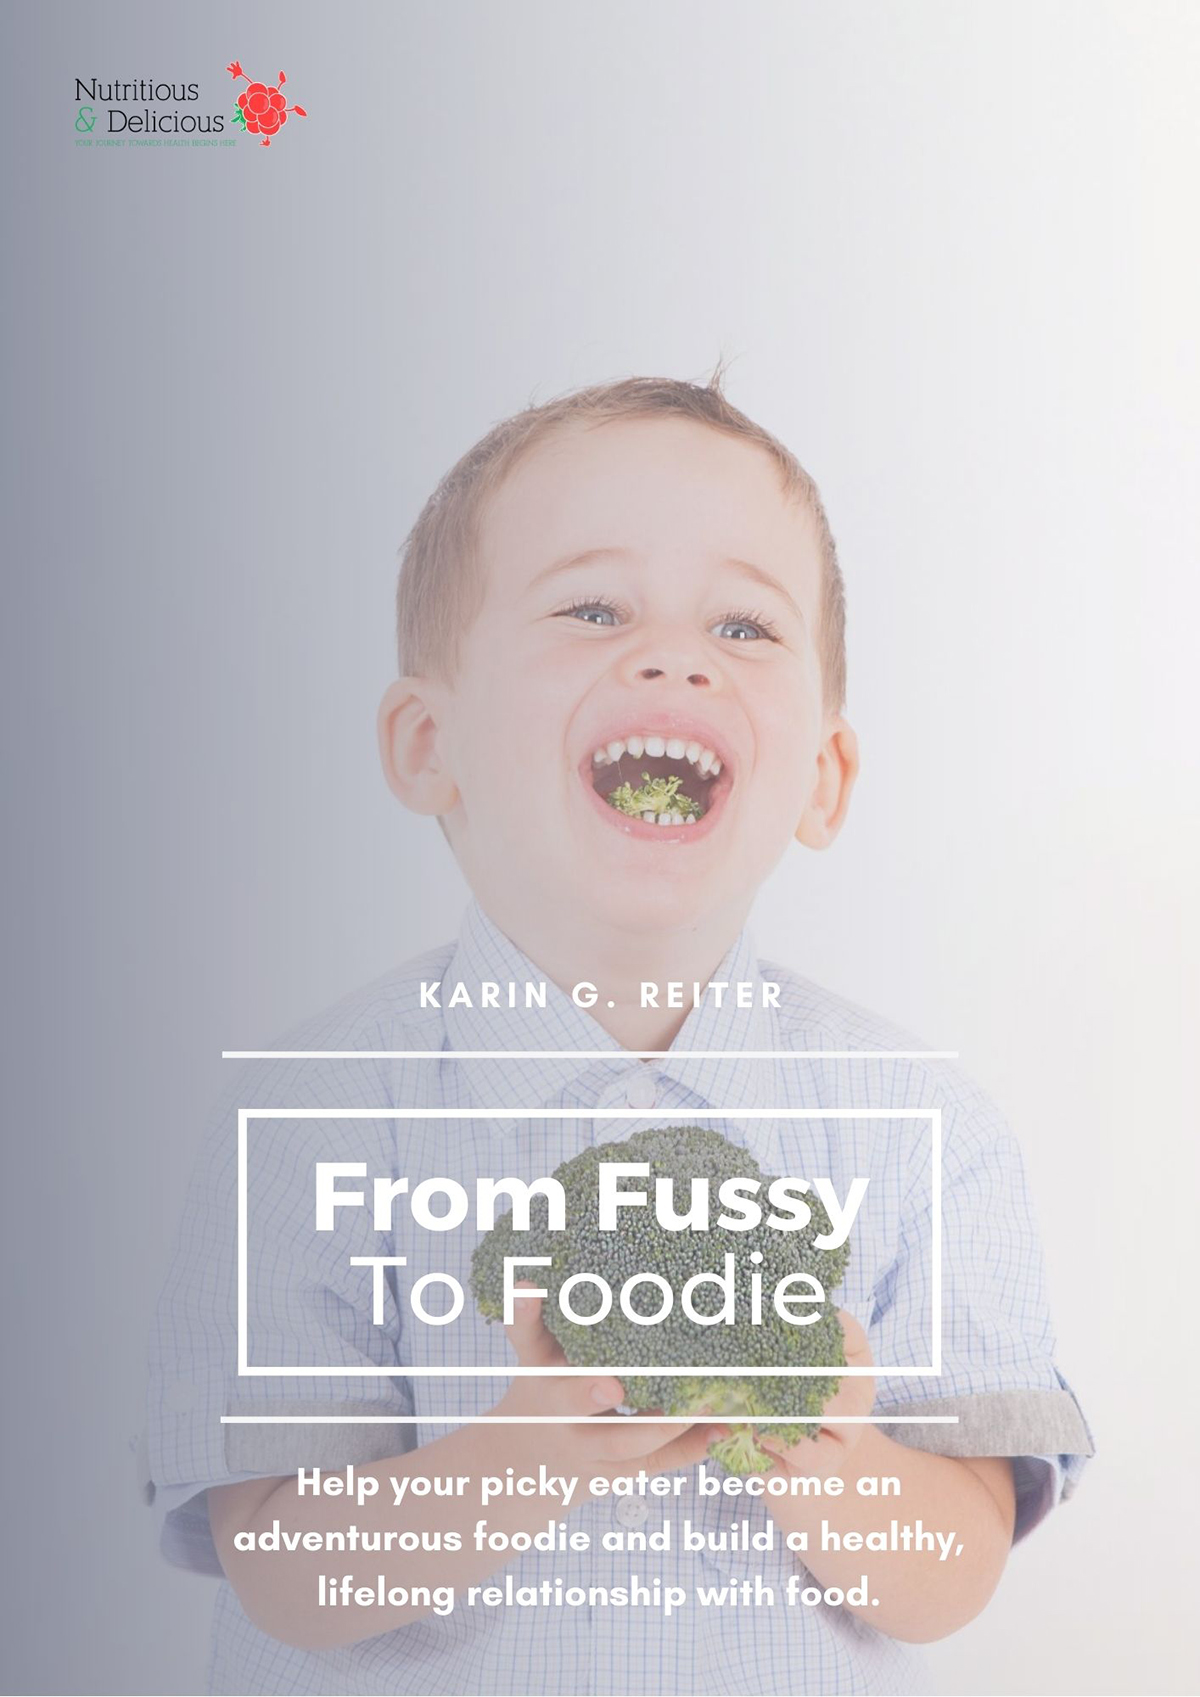 Notes to From fussy to foodie